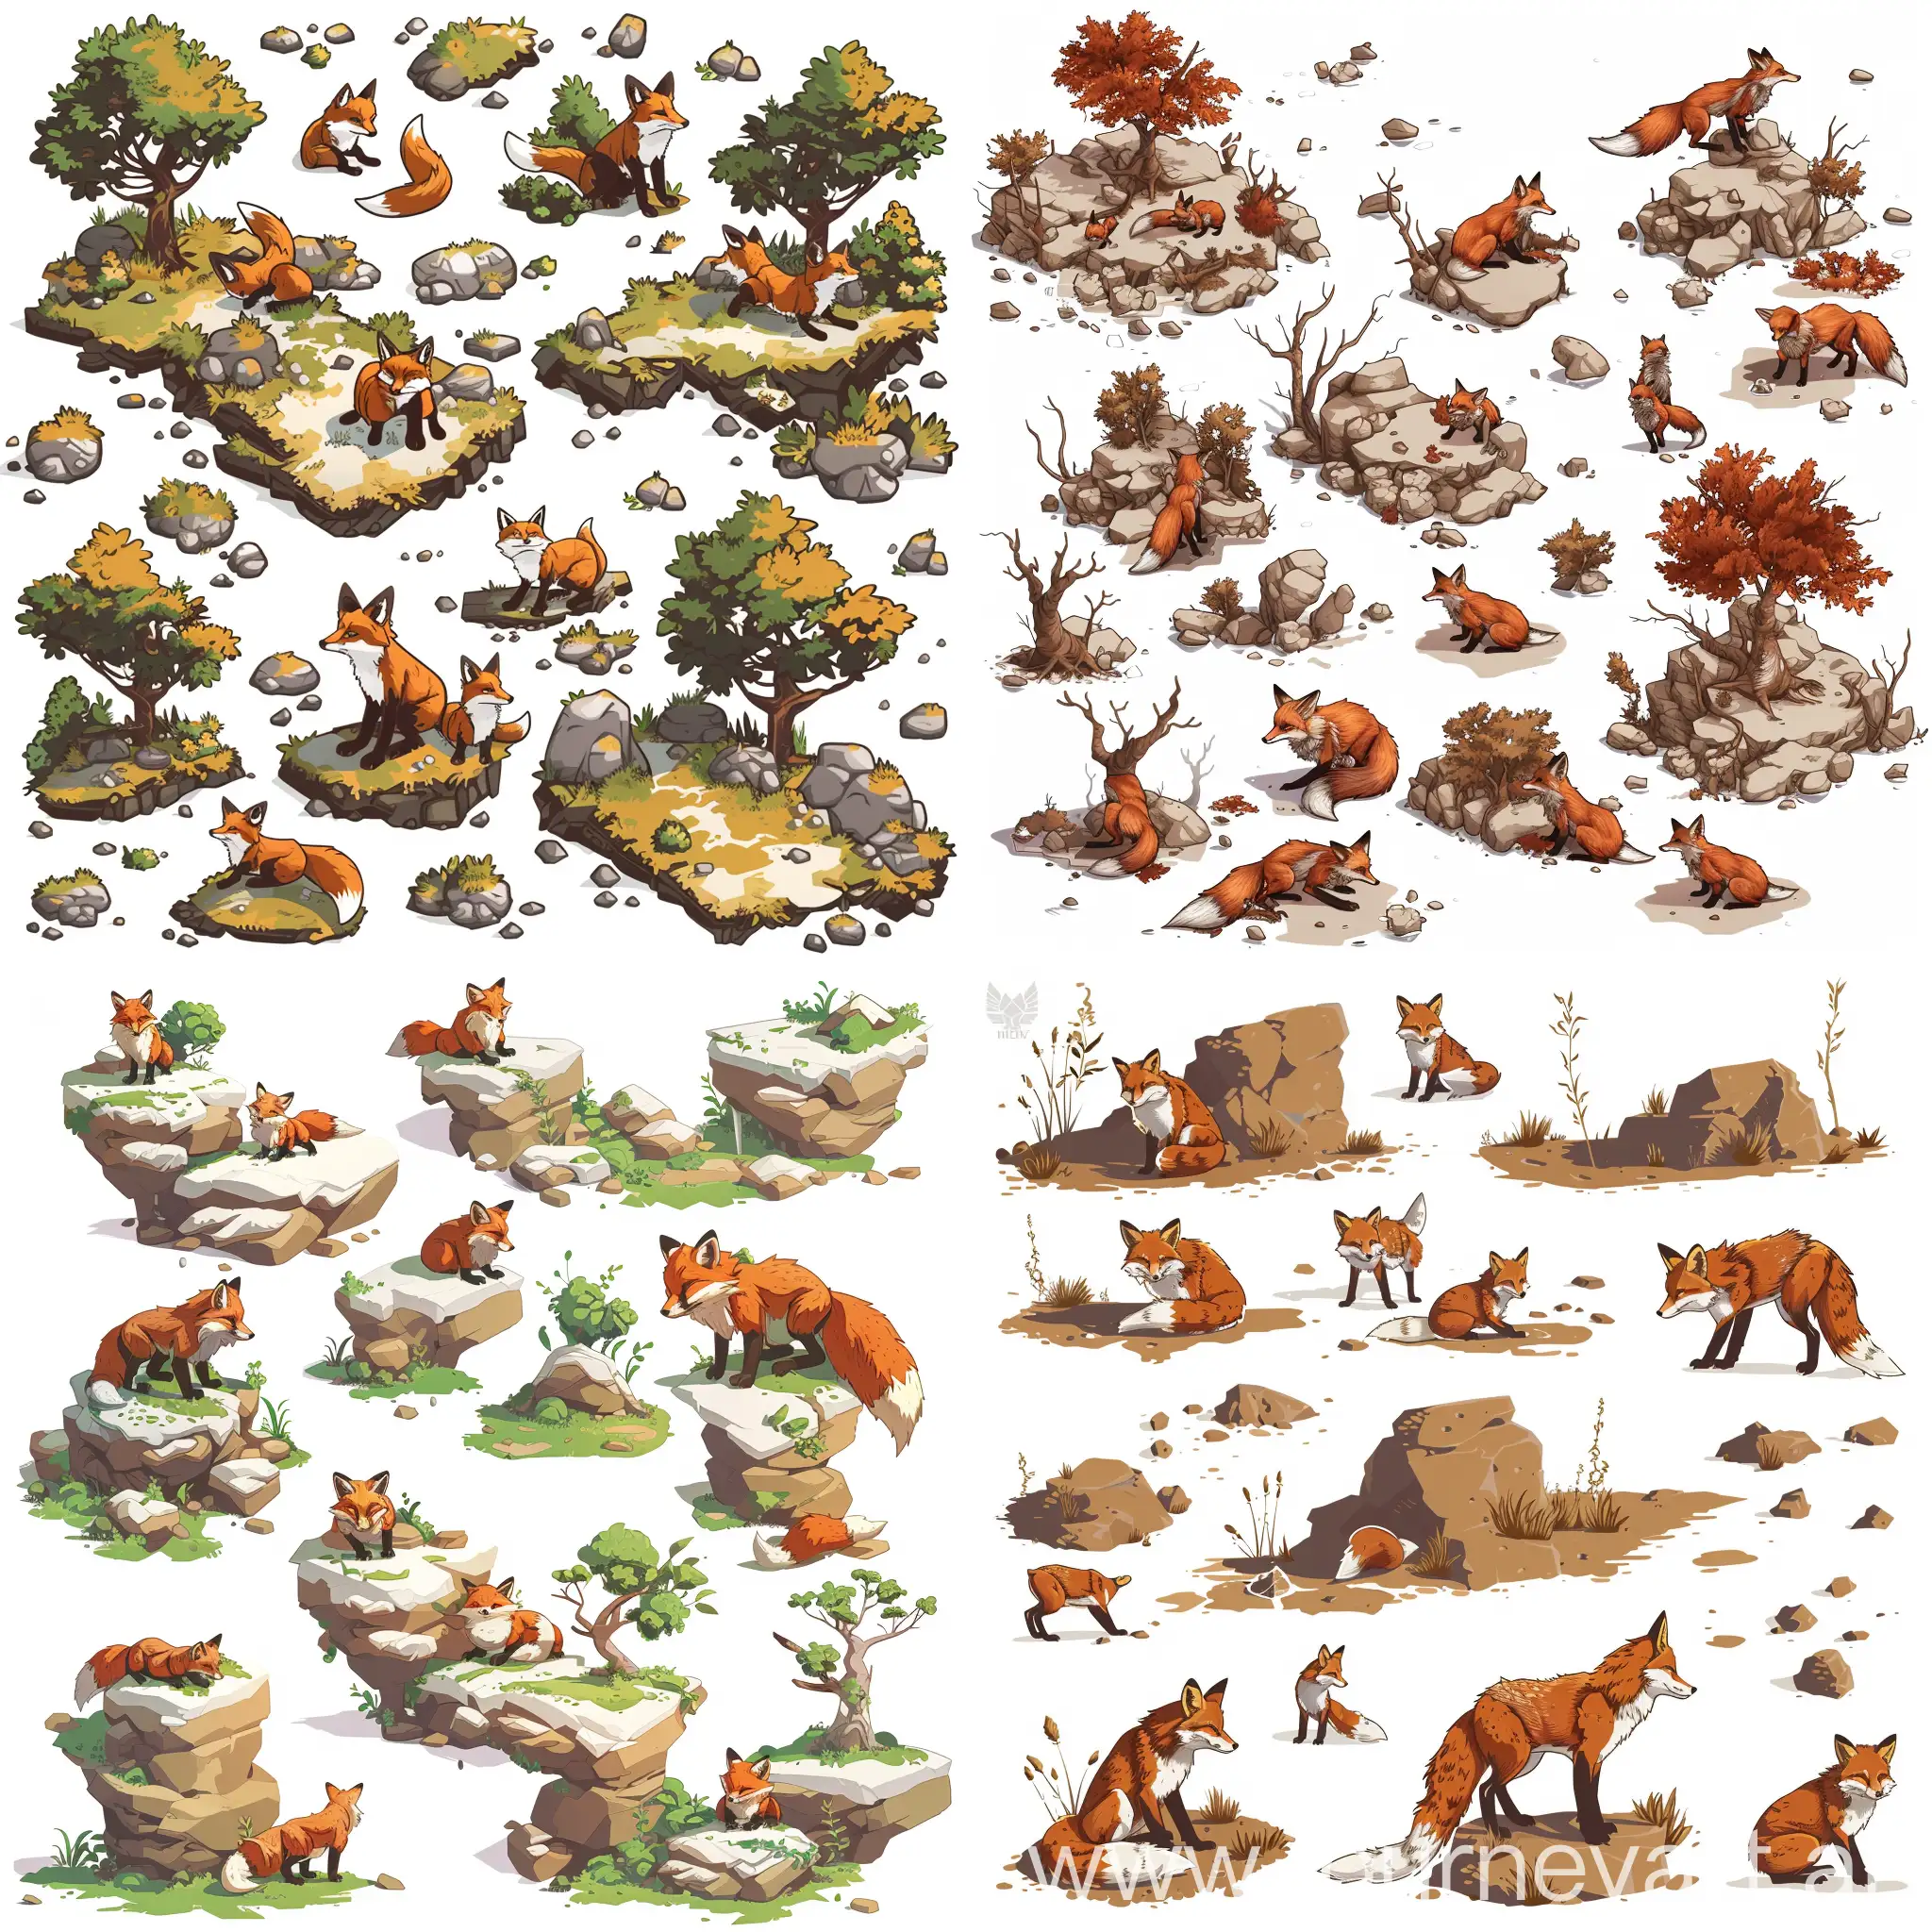 foxes, horizon zero dawn,  post-appcalypse,  a set of sprites for a 2D platformer,  a map of sprites, simple illustration style, unity, white background